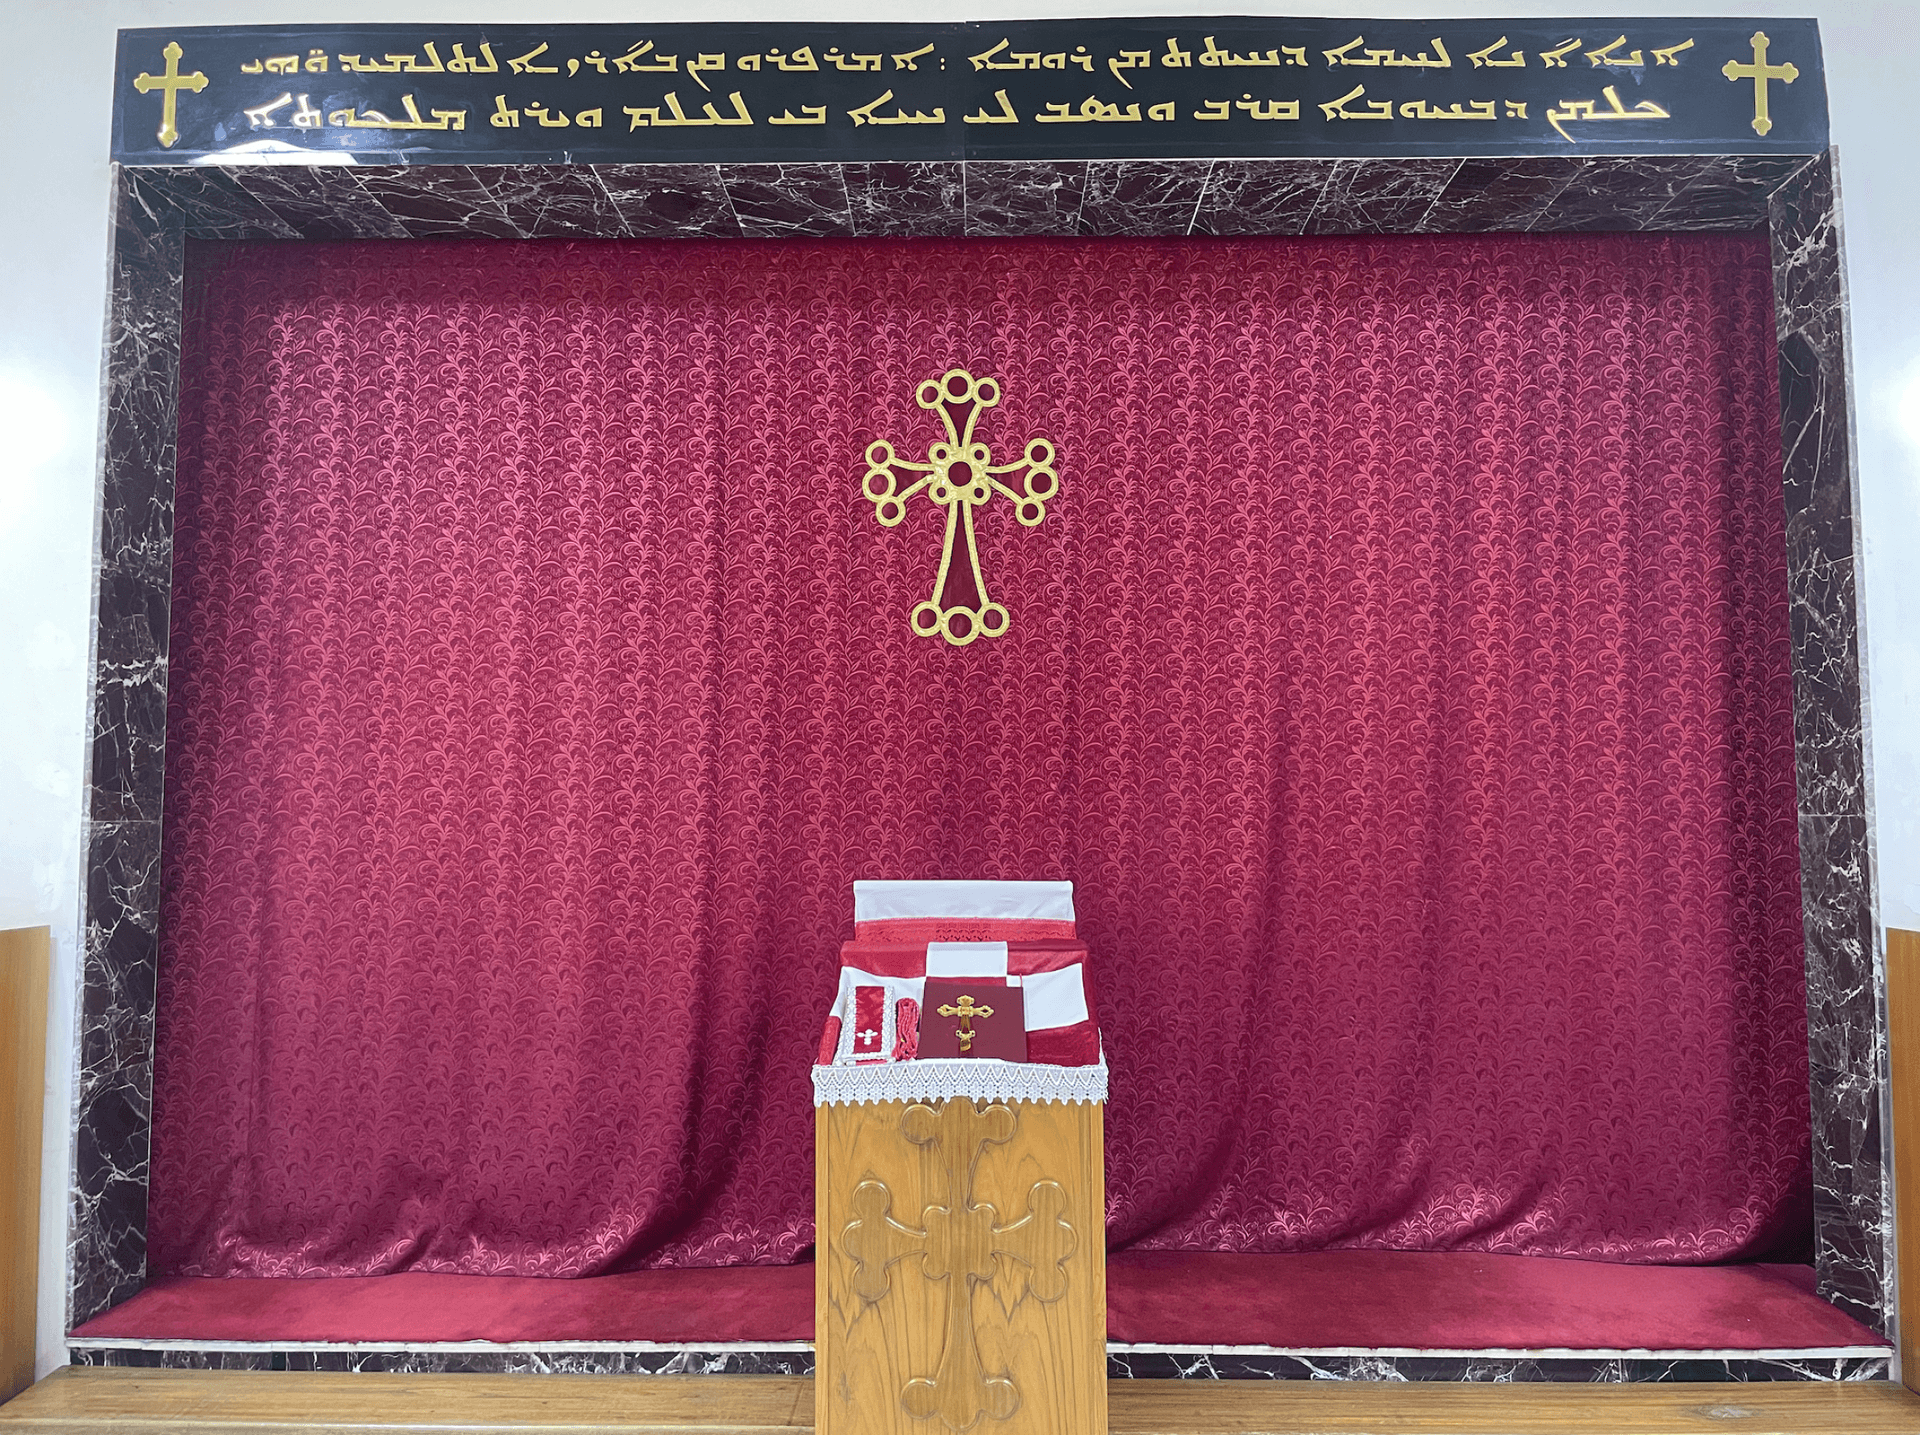 Inside a Syriac church in Bagdad, Iraq. The distinctive Syriac cross is displayed, with its 12 circles at each point representing the 12 disciples of Jesus Christ.